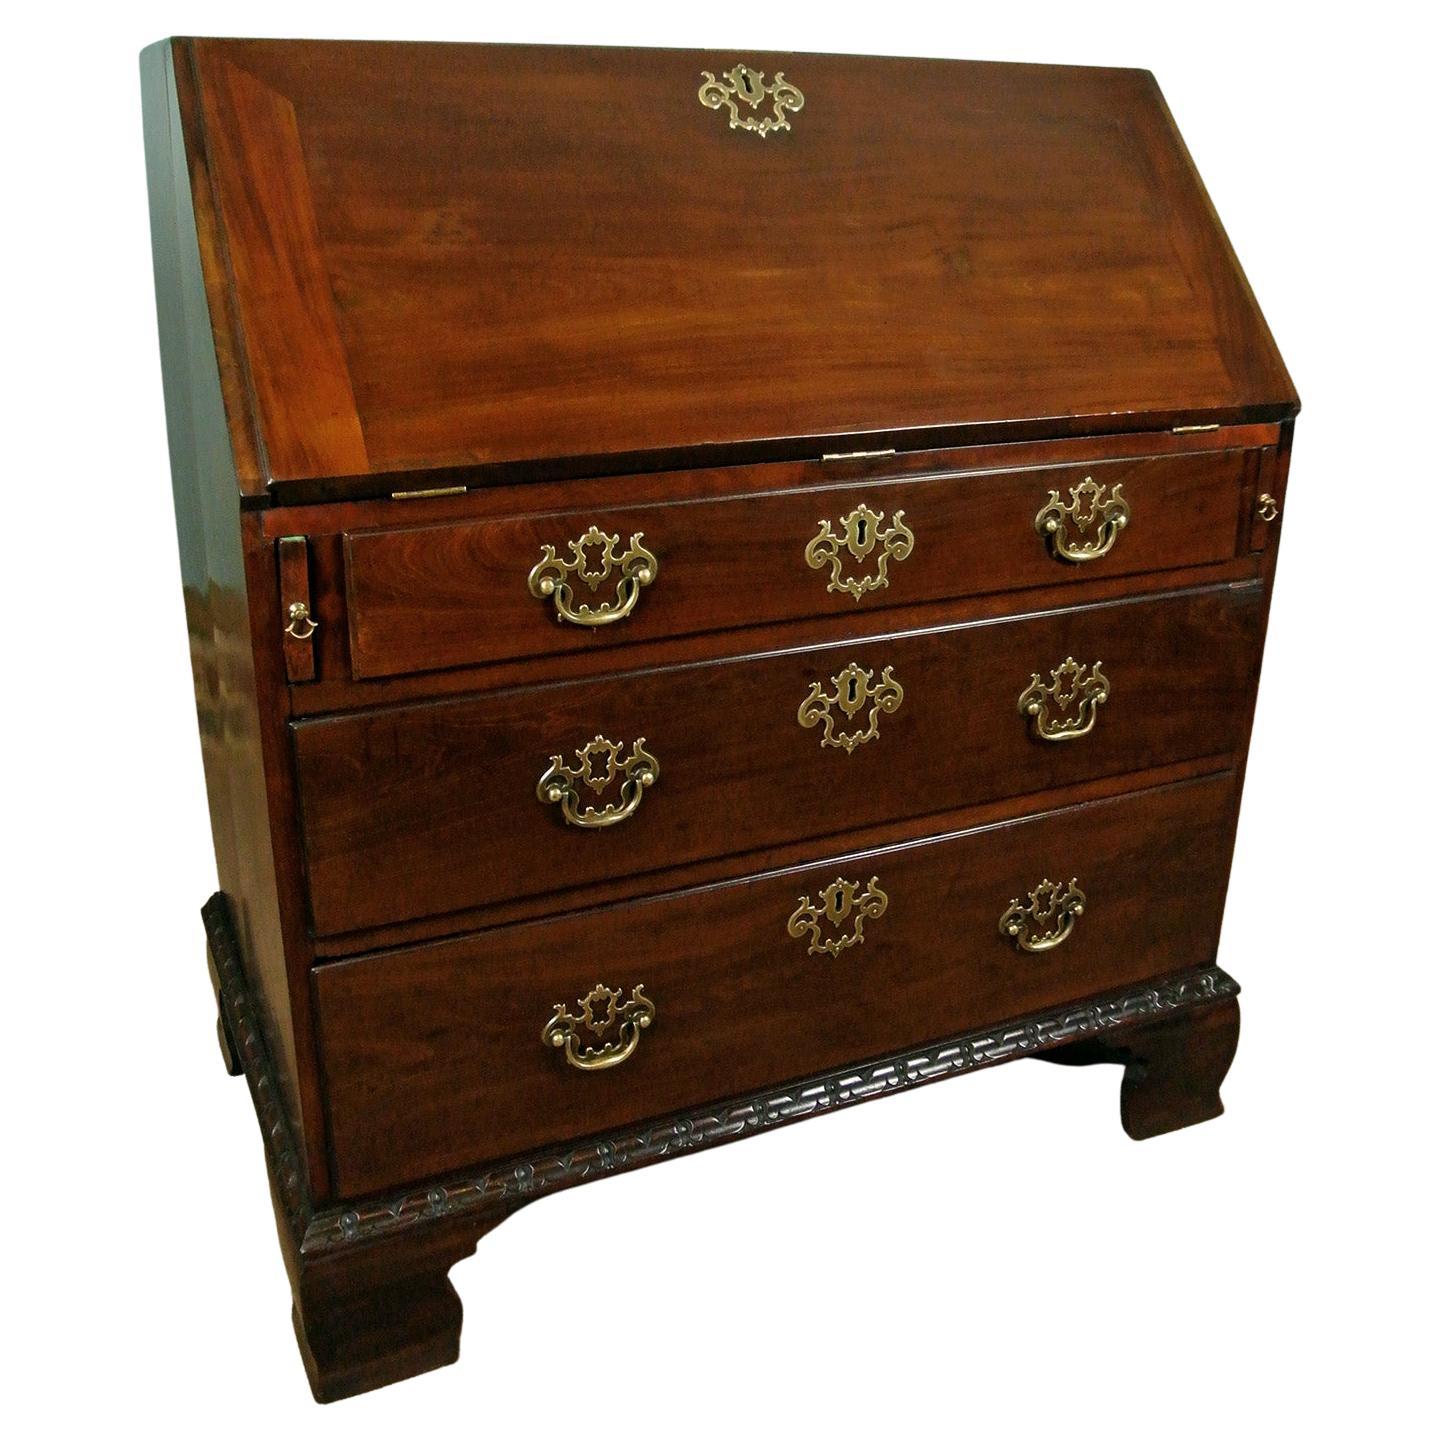 Exceptional Rare and Fine Padouk Wood Bureau in the Chippendale Manner, c. 1780 For Sale